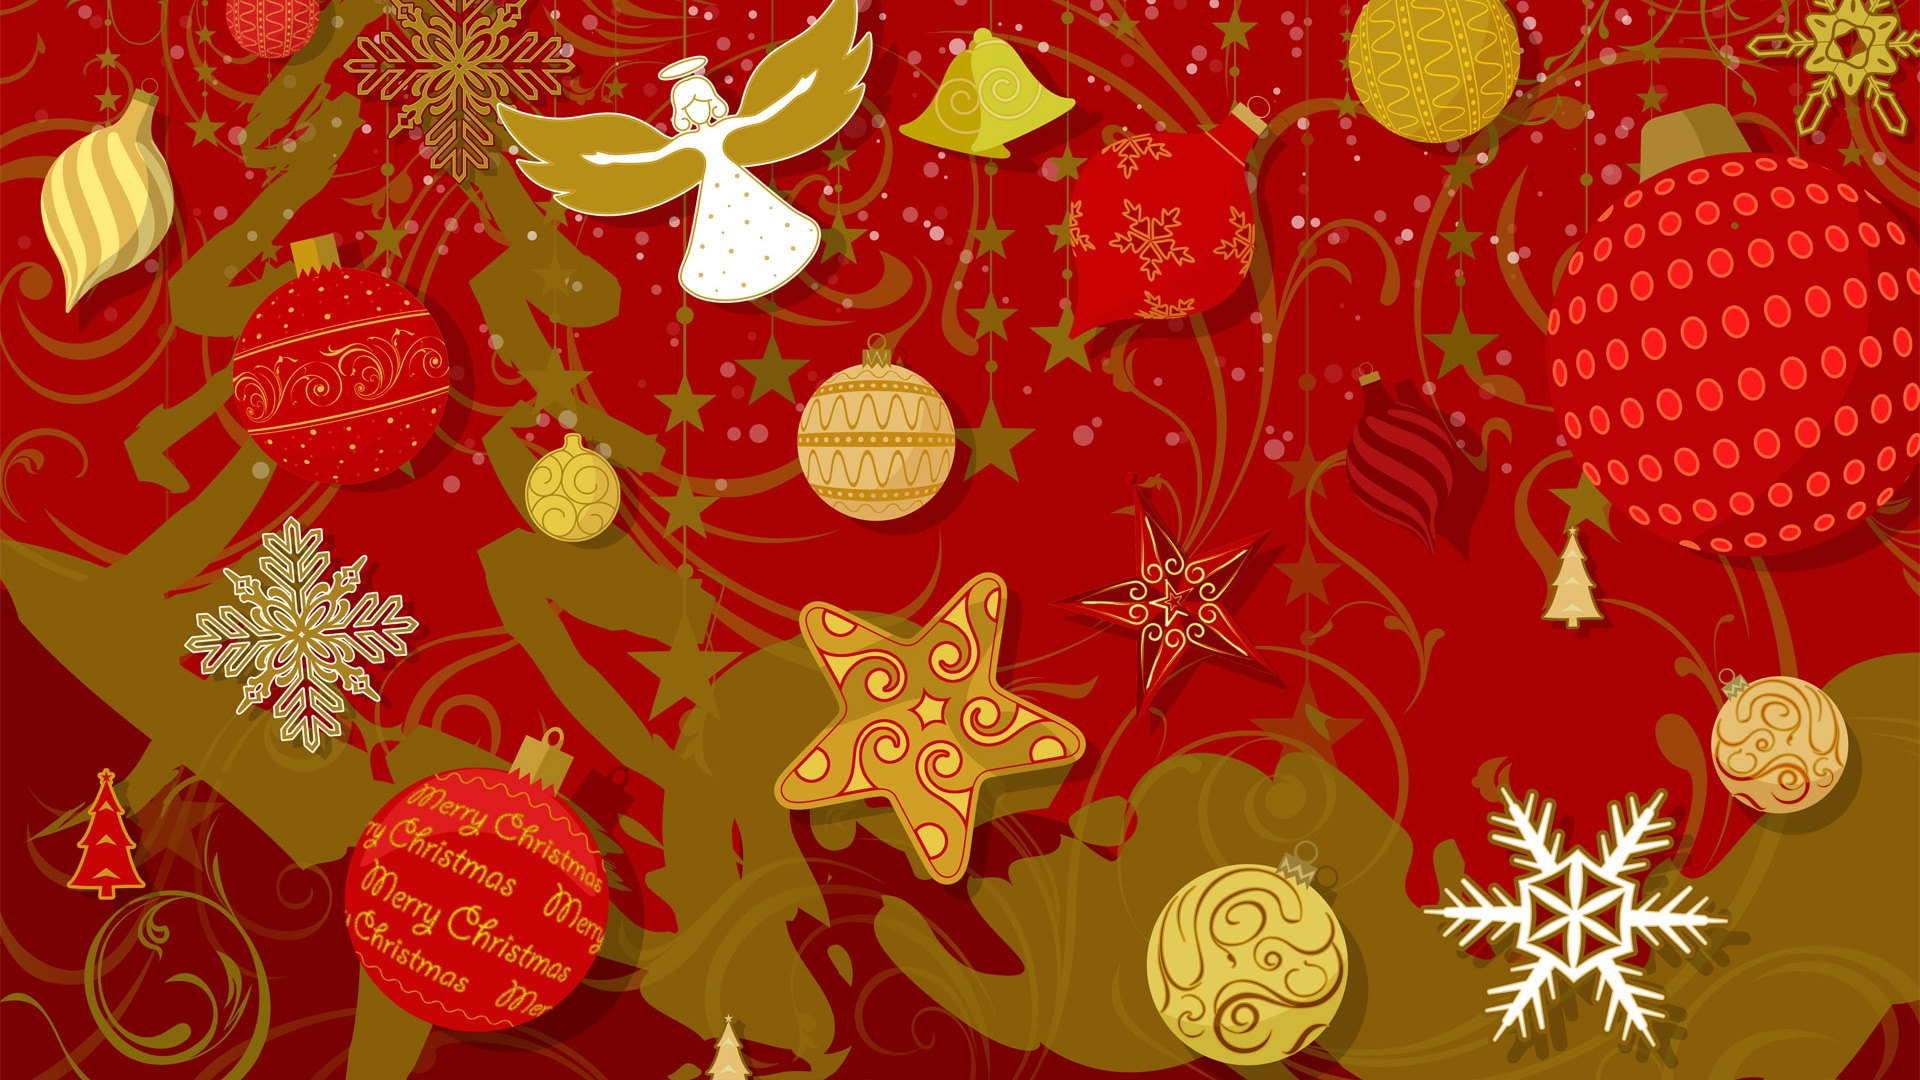 Christmas Wallpaper 186 wallpapers55.com - Best Wallpapers for